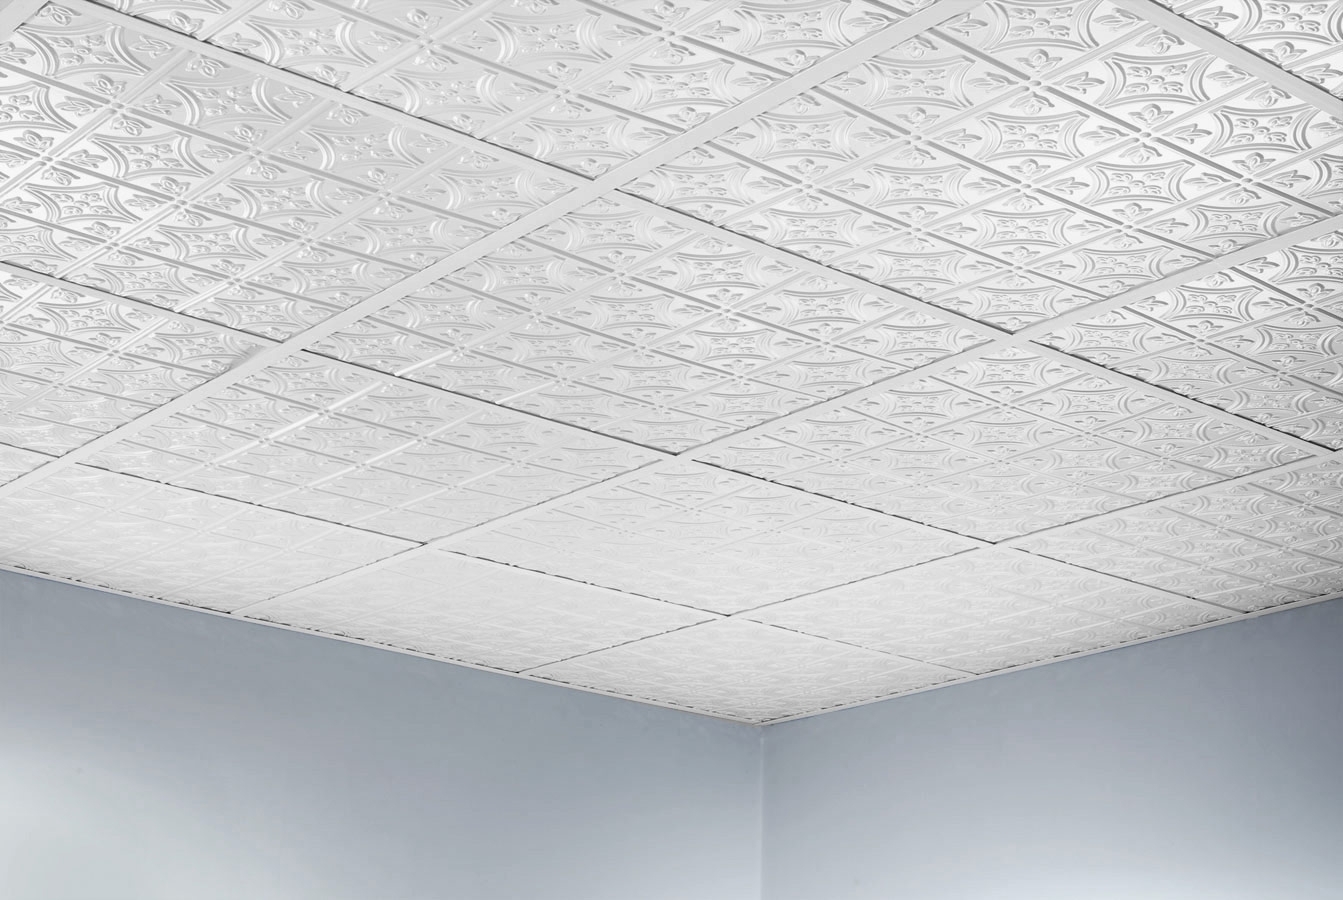 Armstrong Acoustical Ceiling Tile 704a Armstrong Acoustical Ceiling Tile 704a 704a armstrong ceiling tile image collections tile flooring 1343 X 900